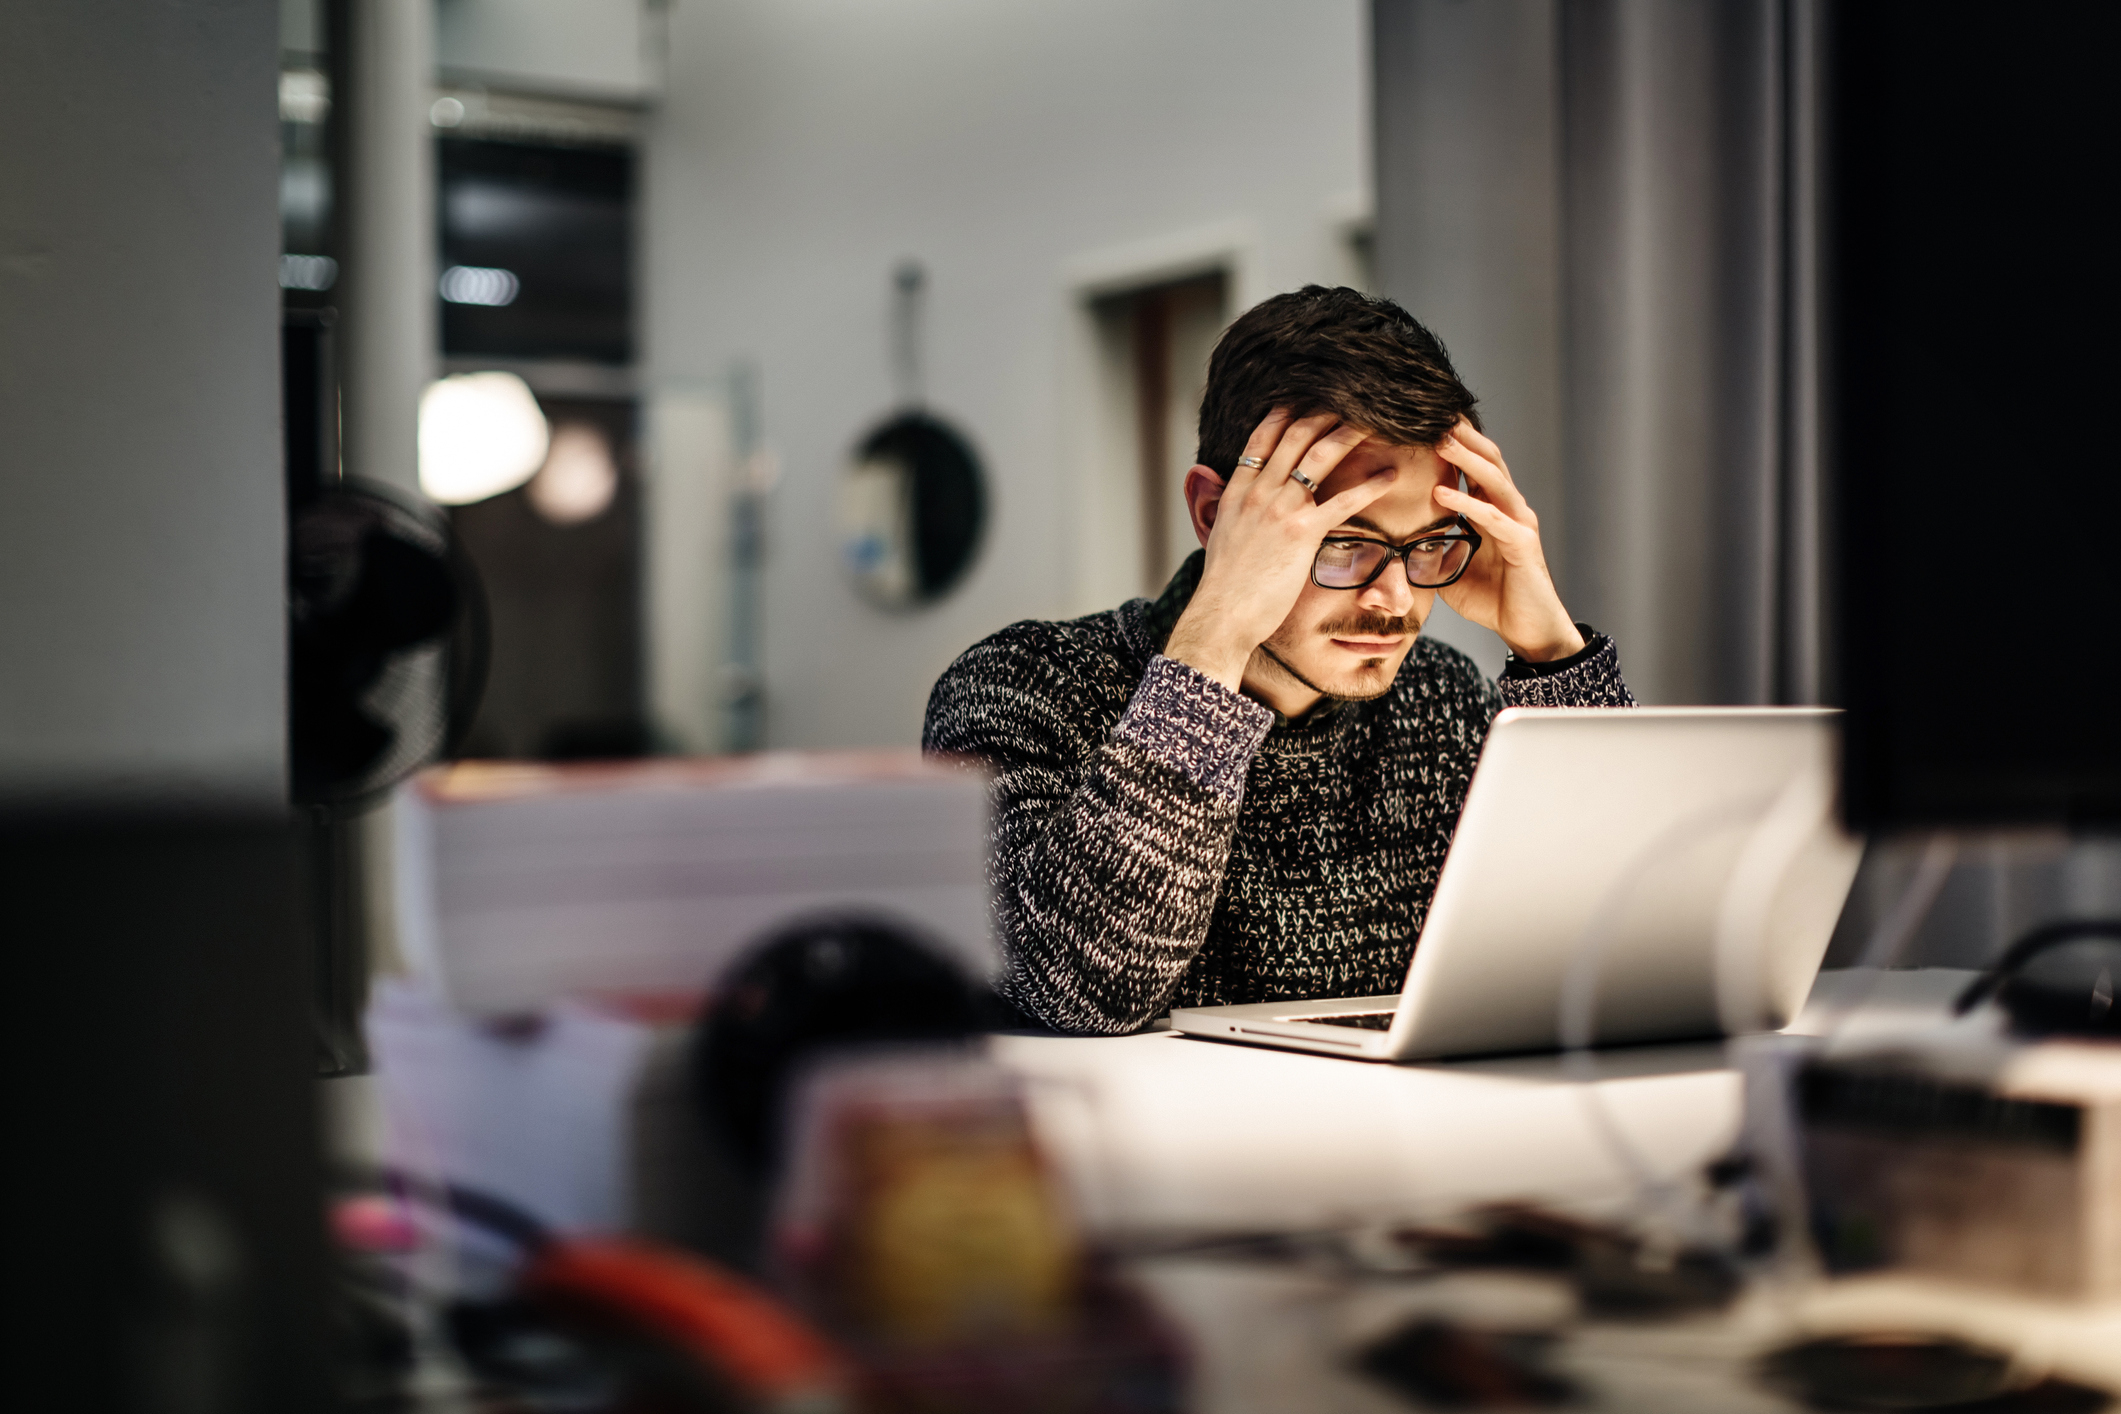 A man stressed at work in front of his laptop